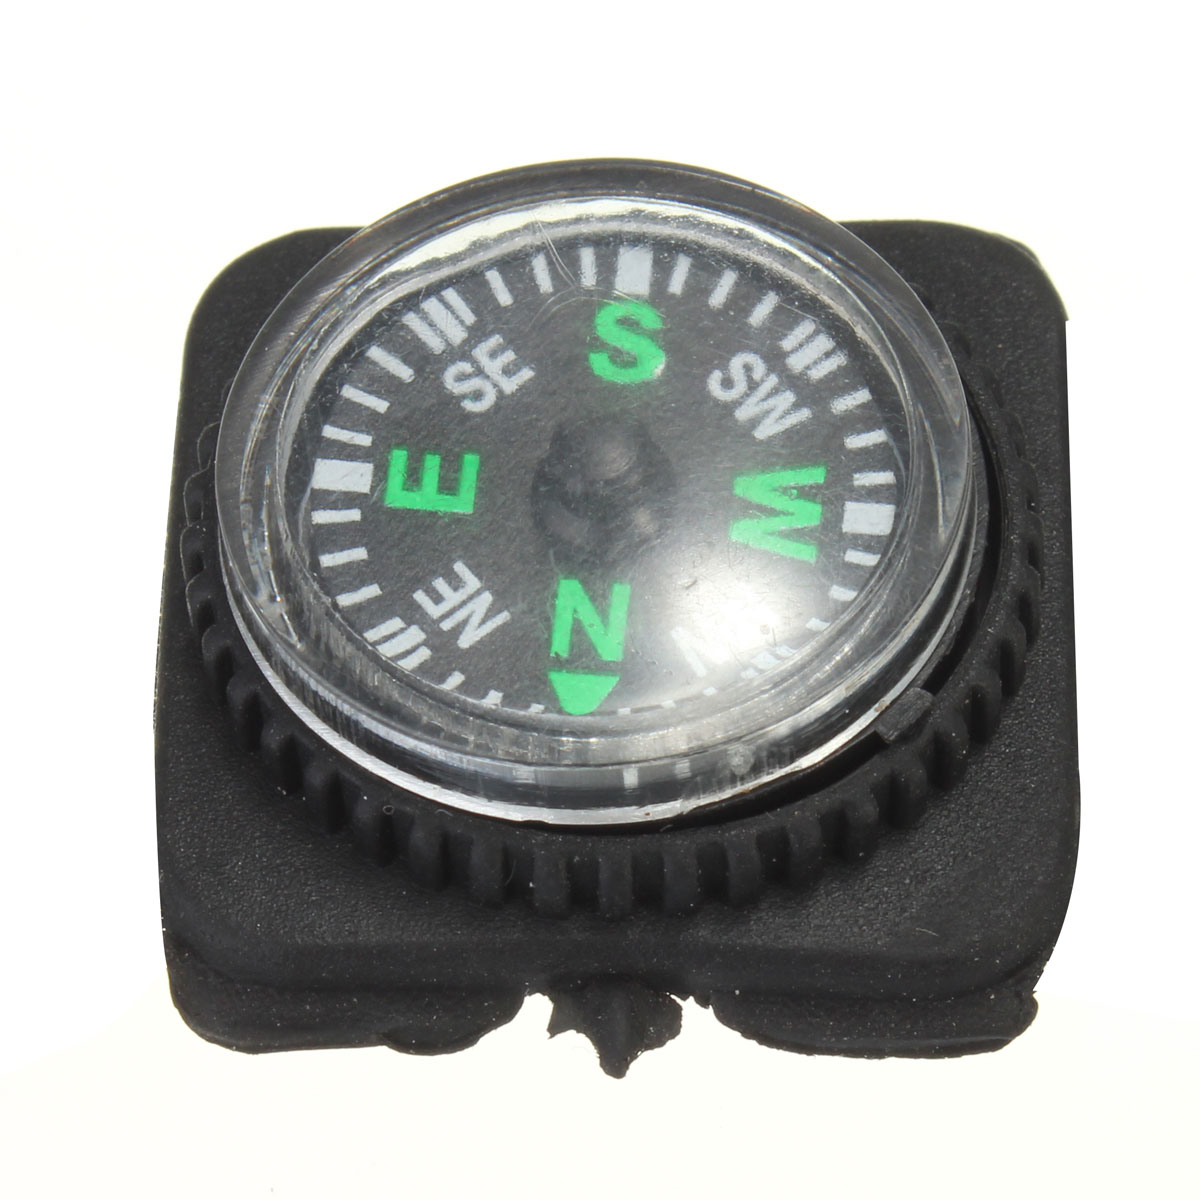 IPReetrade-Mini-EDC-Compass-For-Paracord-Bracelet-Outdoor-Camping-Emergency-Survival-Tool-1173859